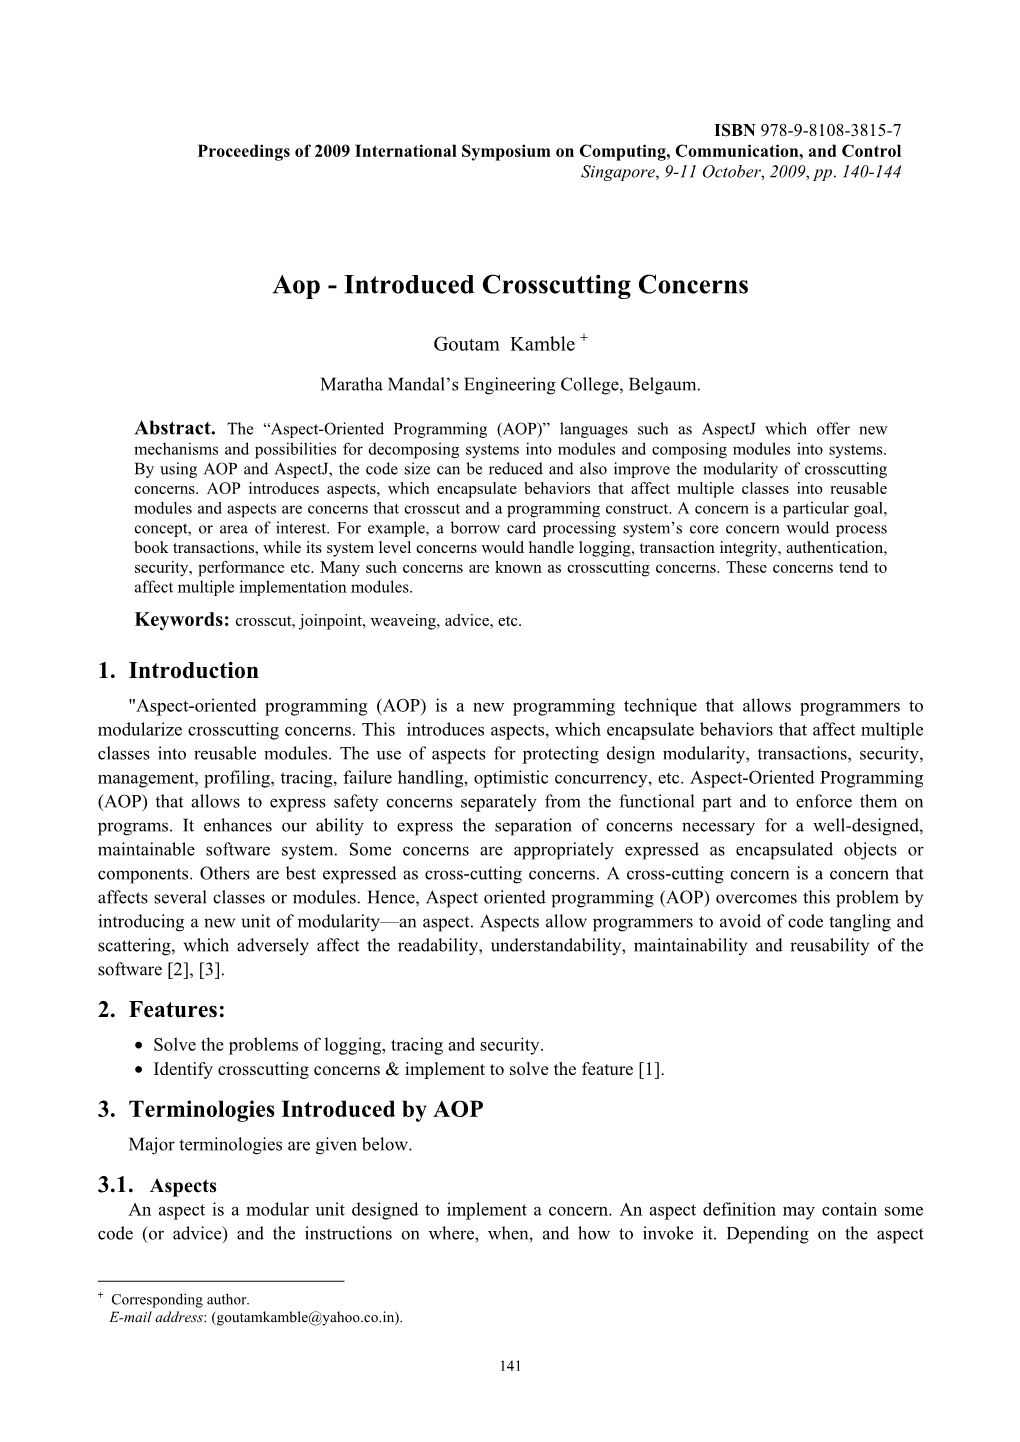 Aop - Introduced Crosscutting Concerns